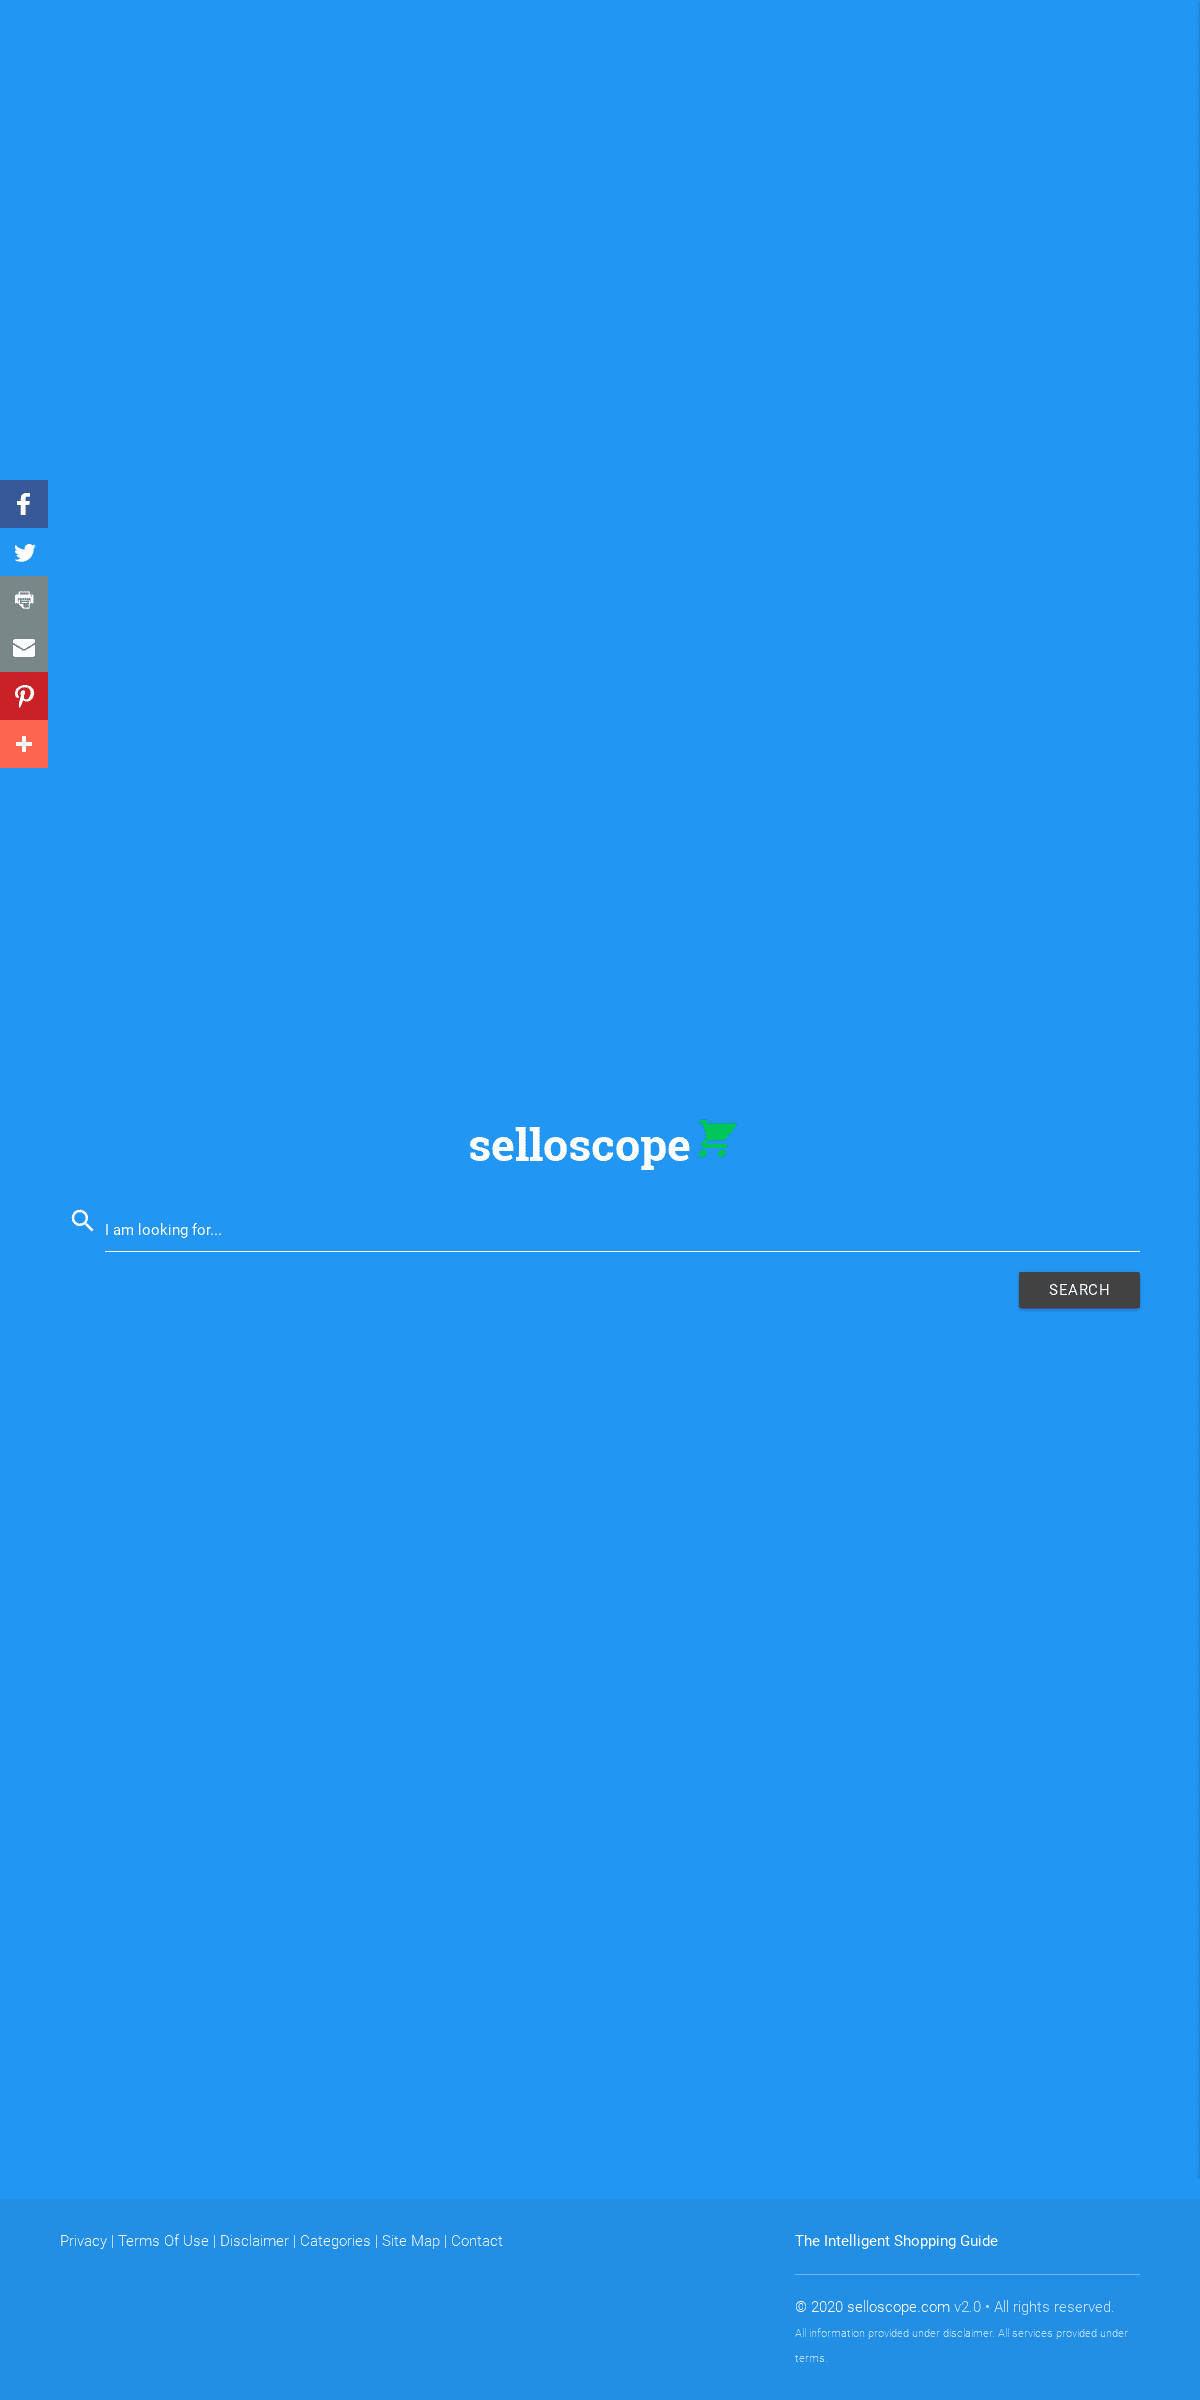 A complete backup of selloscope.com